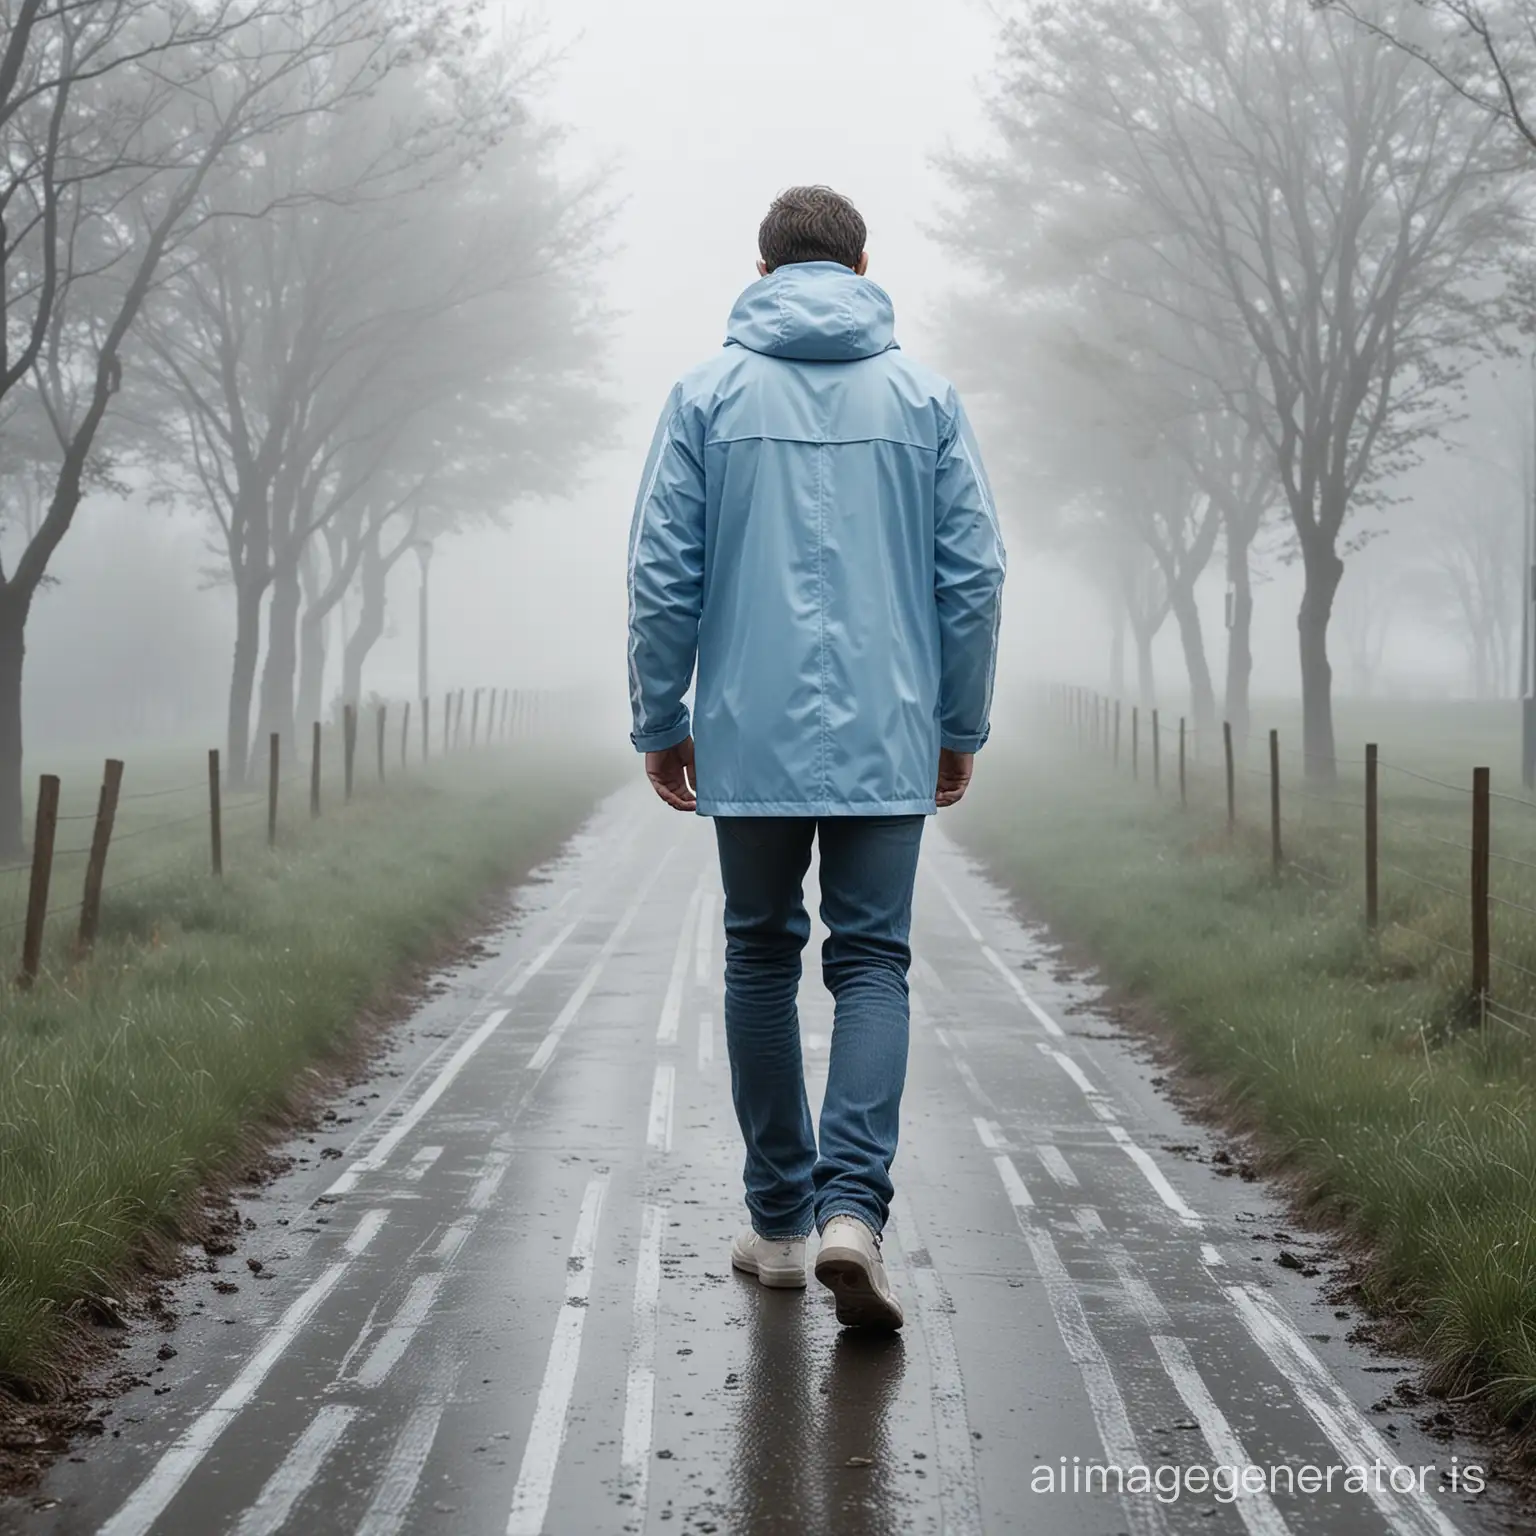 Realistic picture with man standing in foggy weather. Man is wearing light blue rainjacket with vertical thin white stripes. Jacket is full of stripes. Man is walking away.